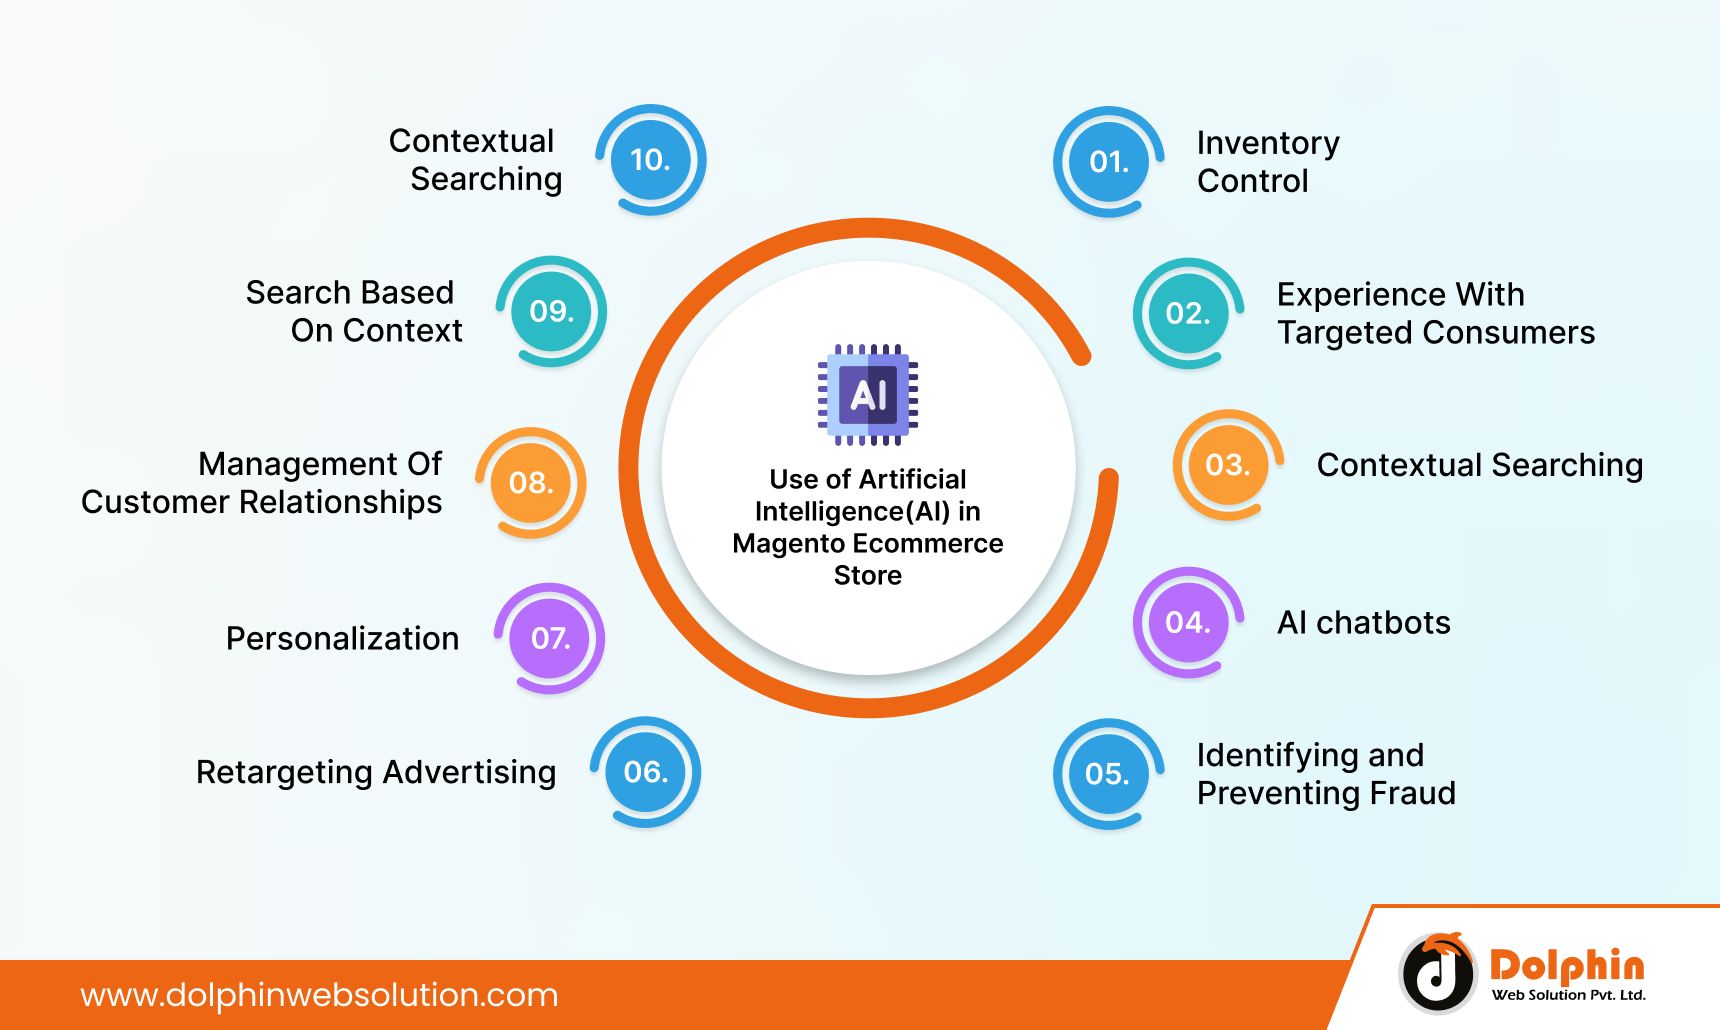 Use of Artificial Intelligence (AI) in Magento Ecommerce Store